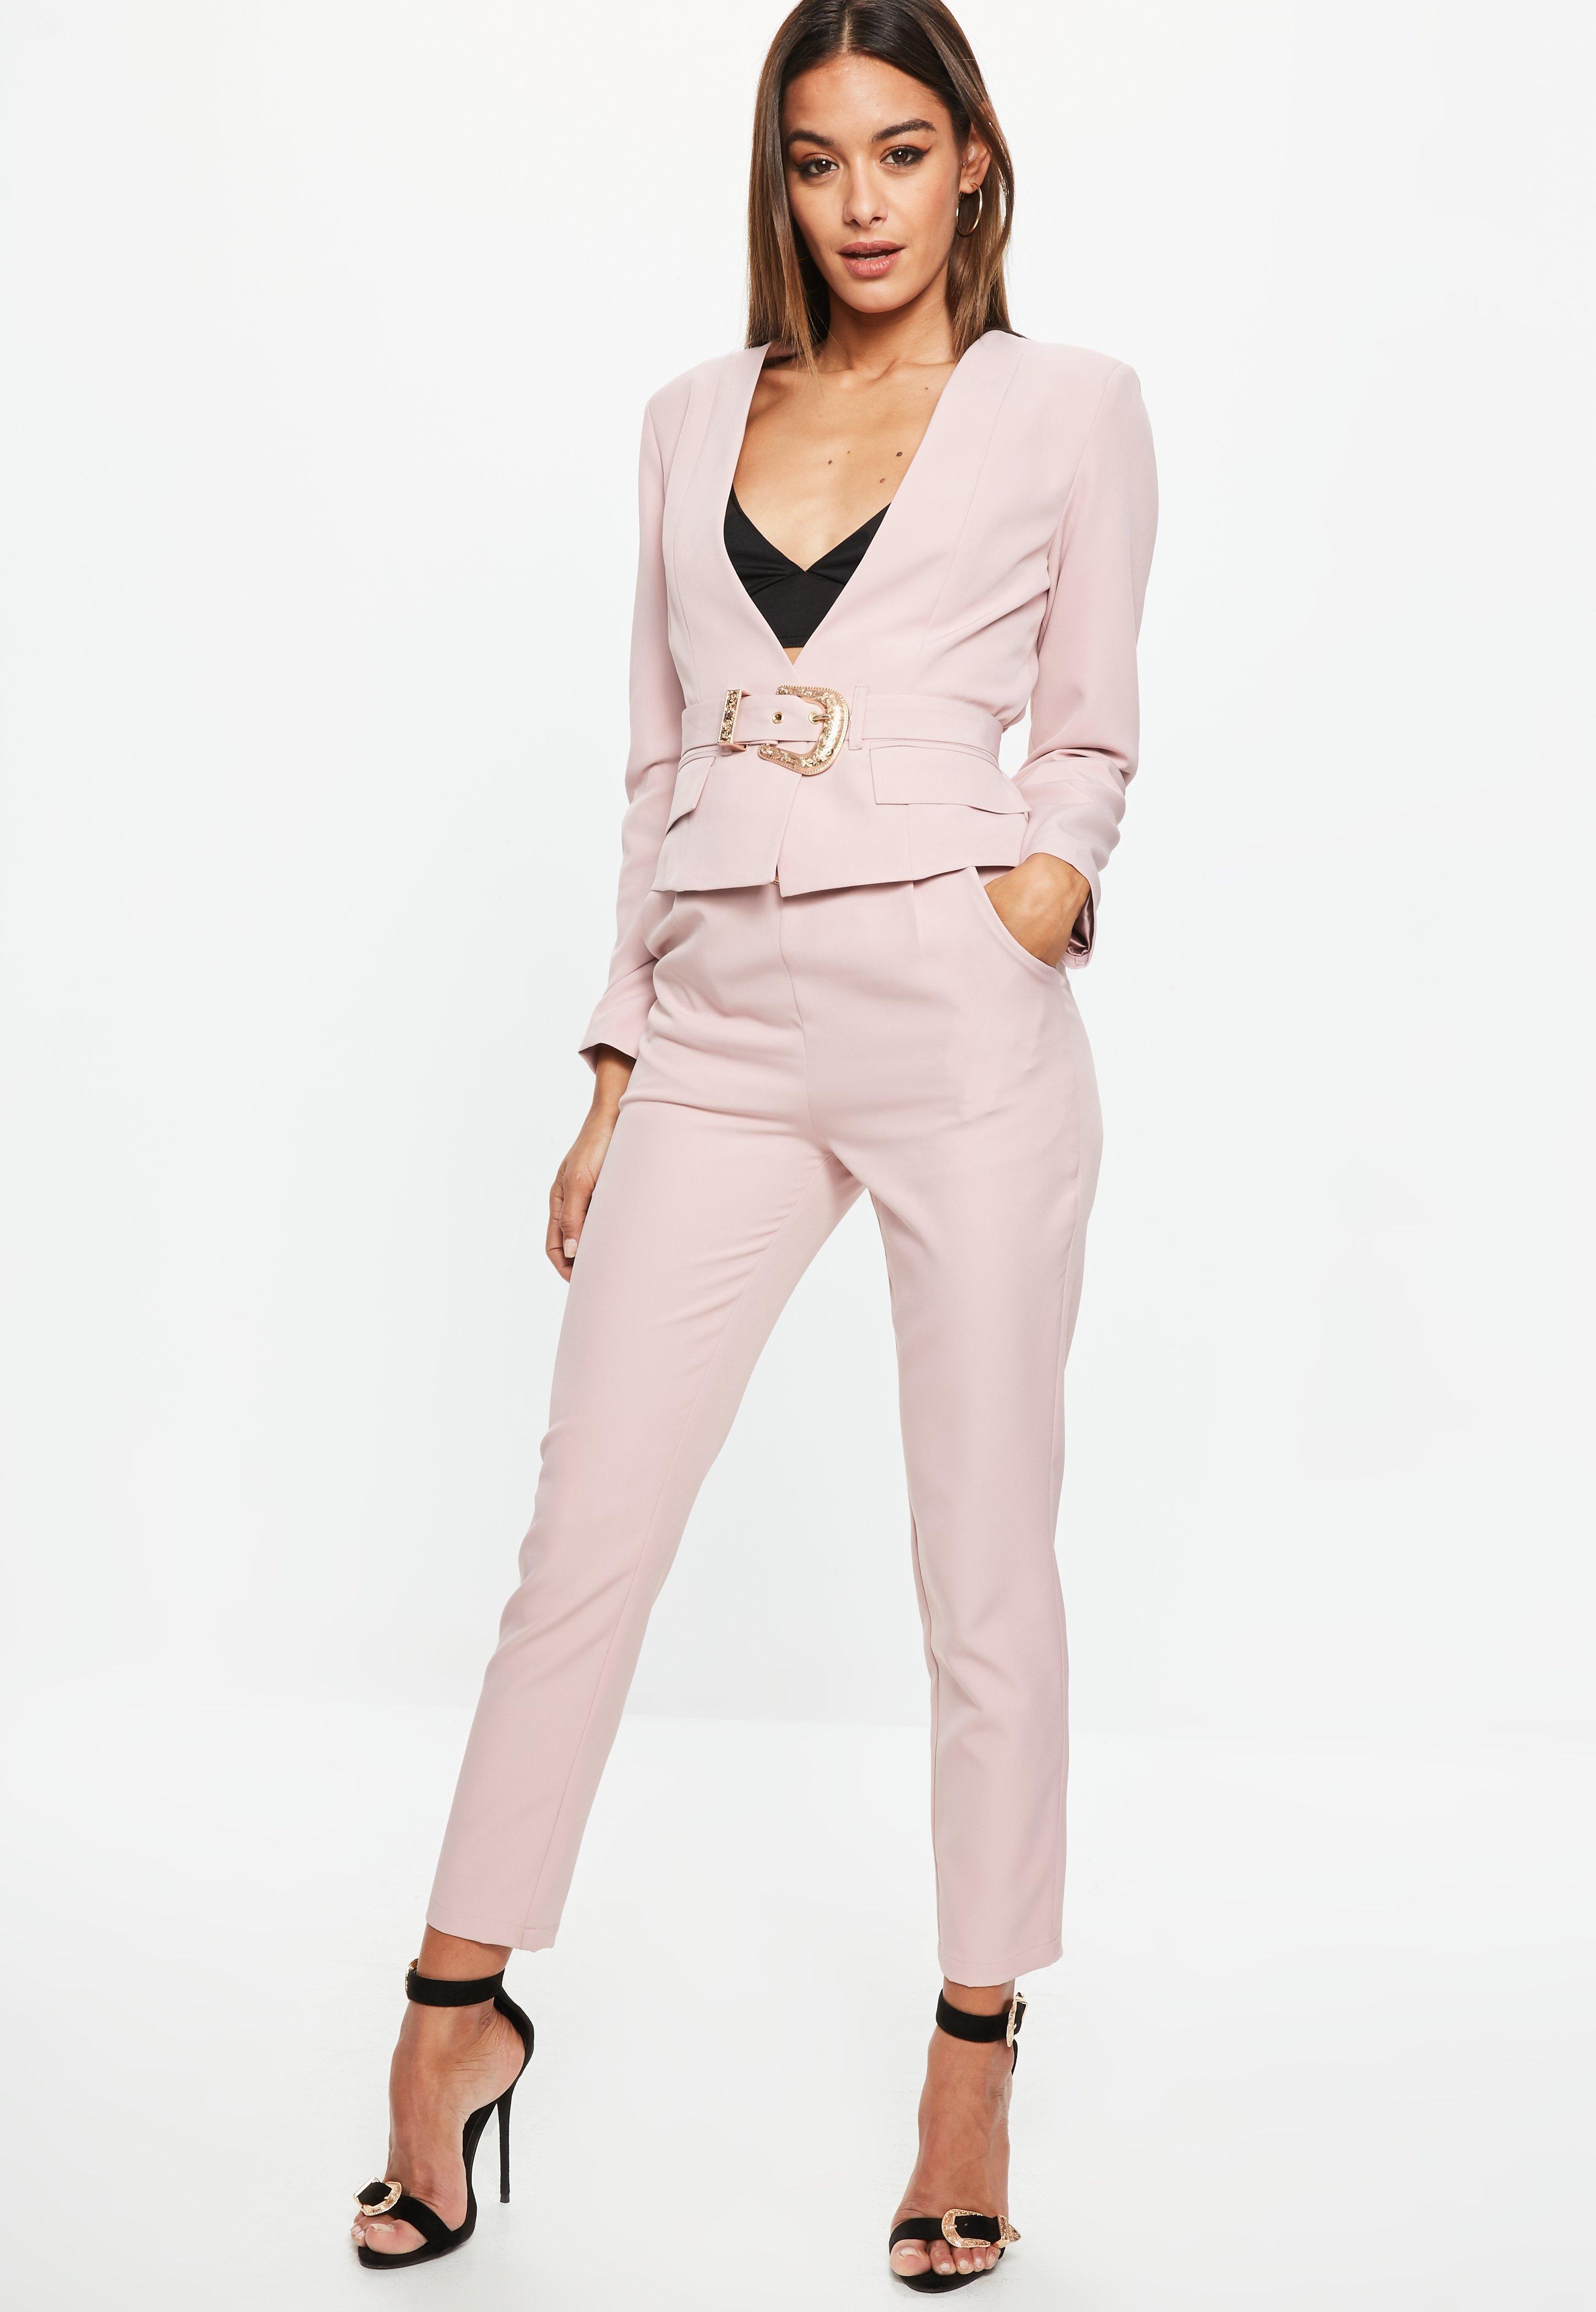 Missguided Synthetic Peace + Love Nude Belted Blazer Dress 